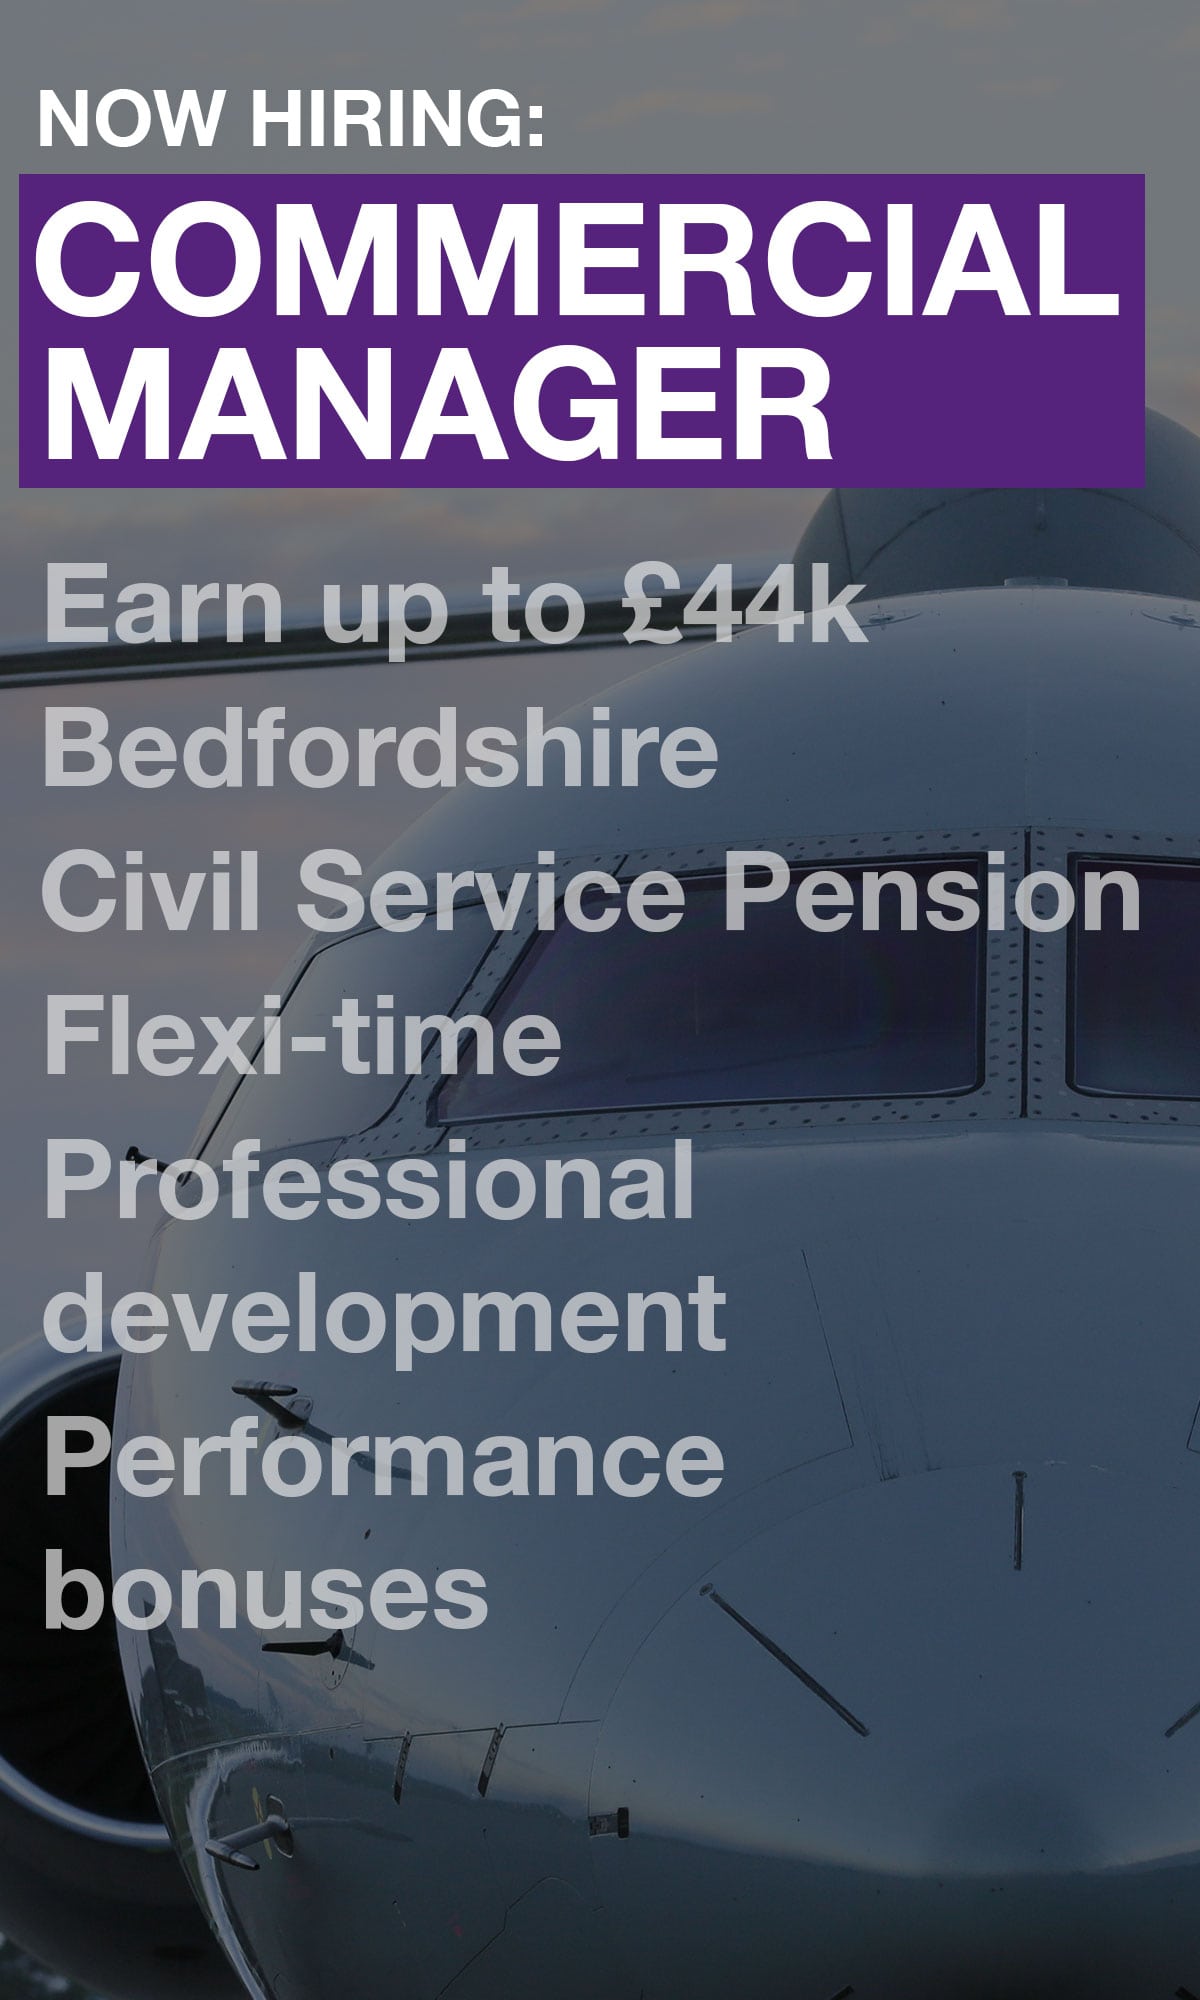 A grey plane with "Commercial Manager" written over it in purple